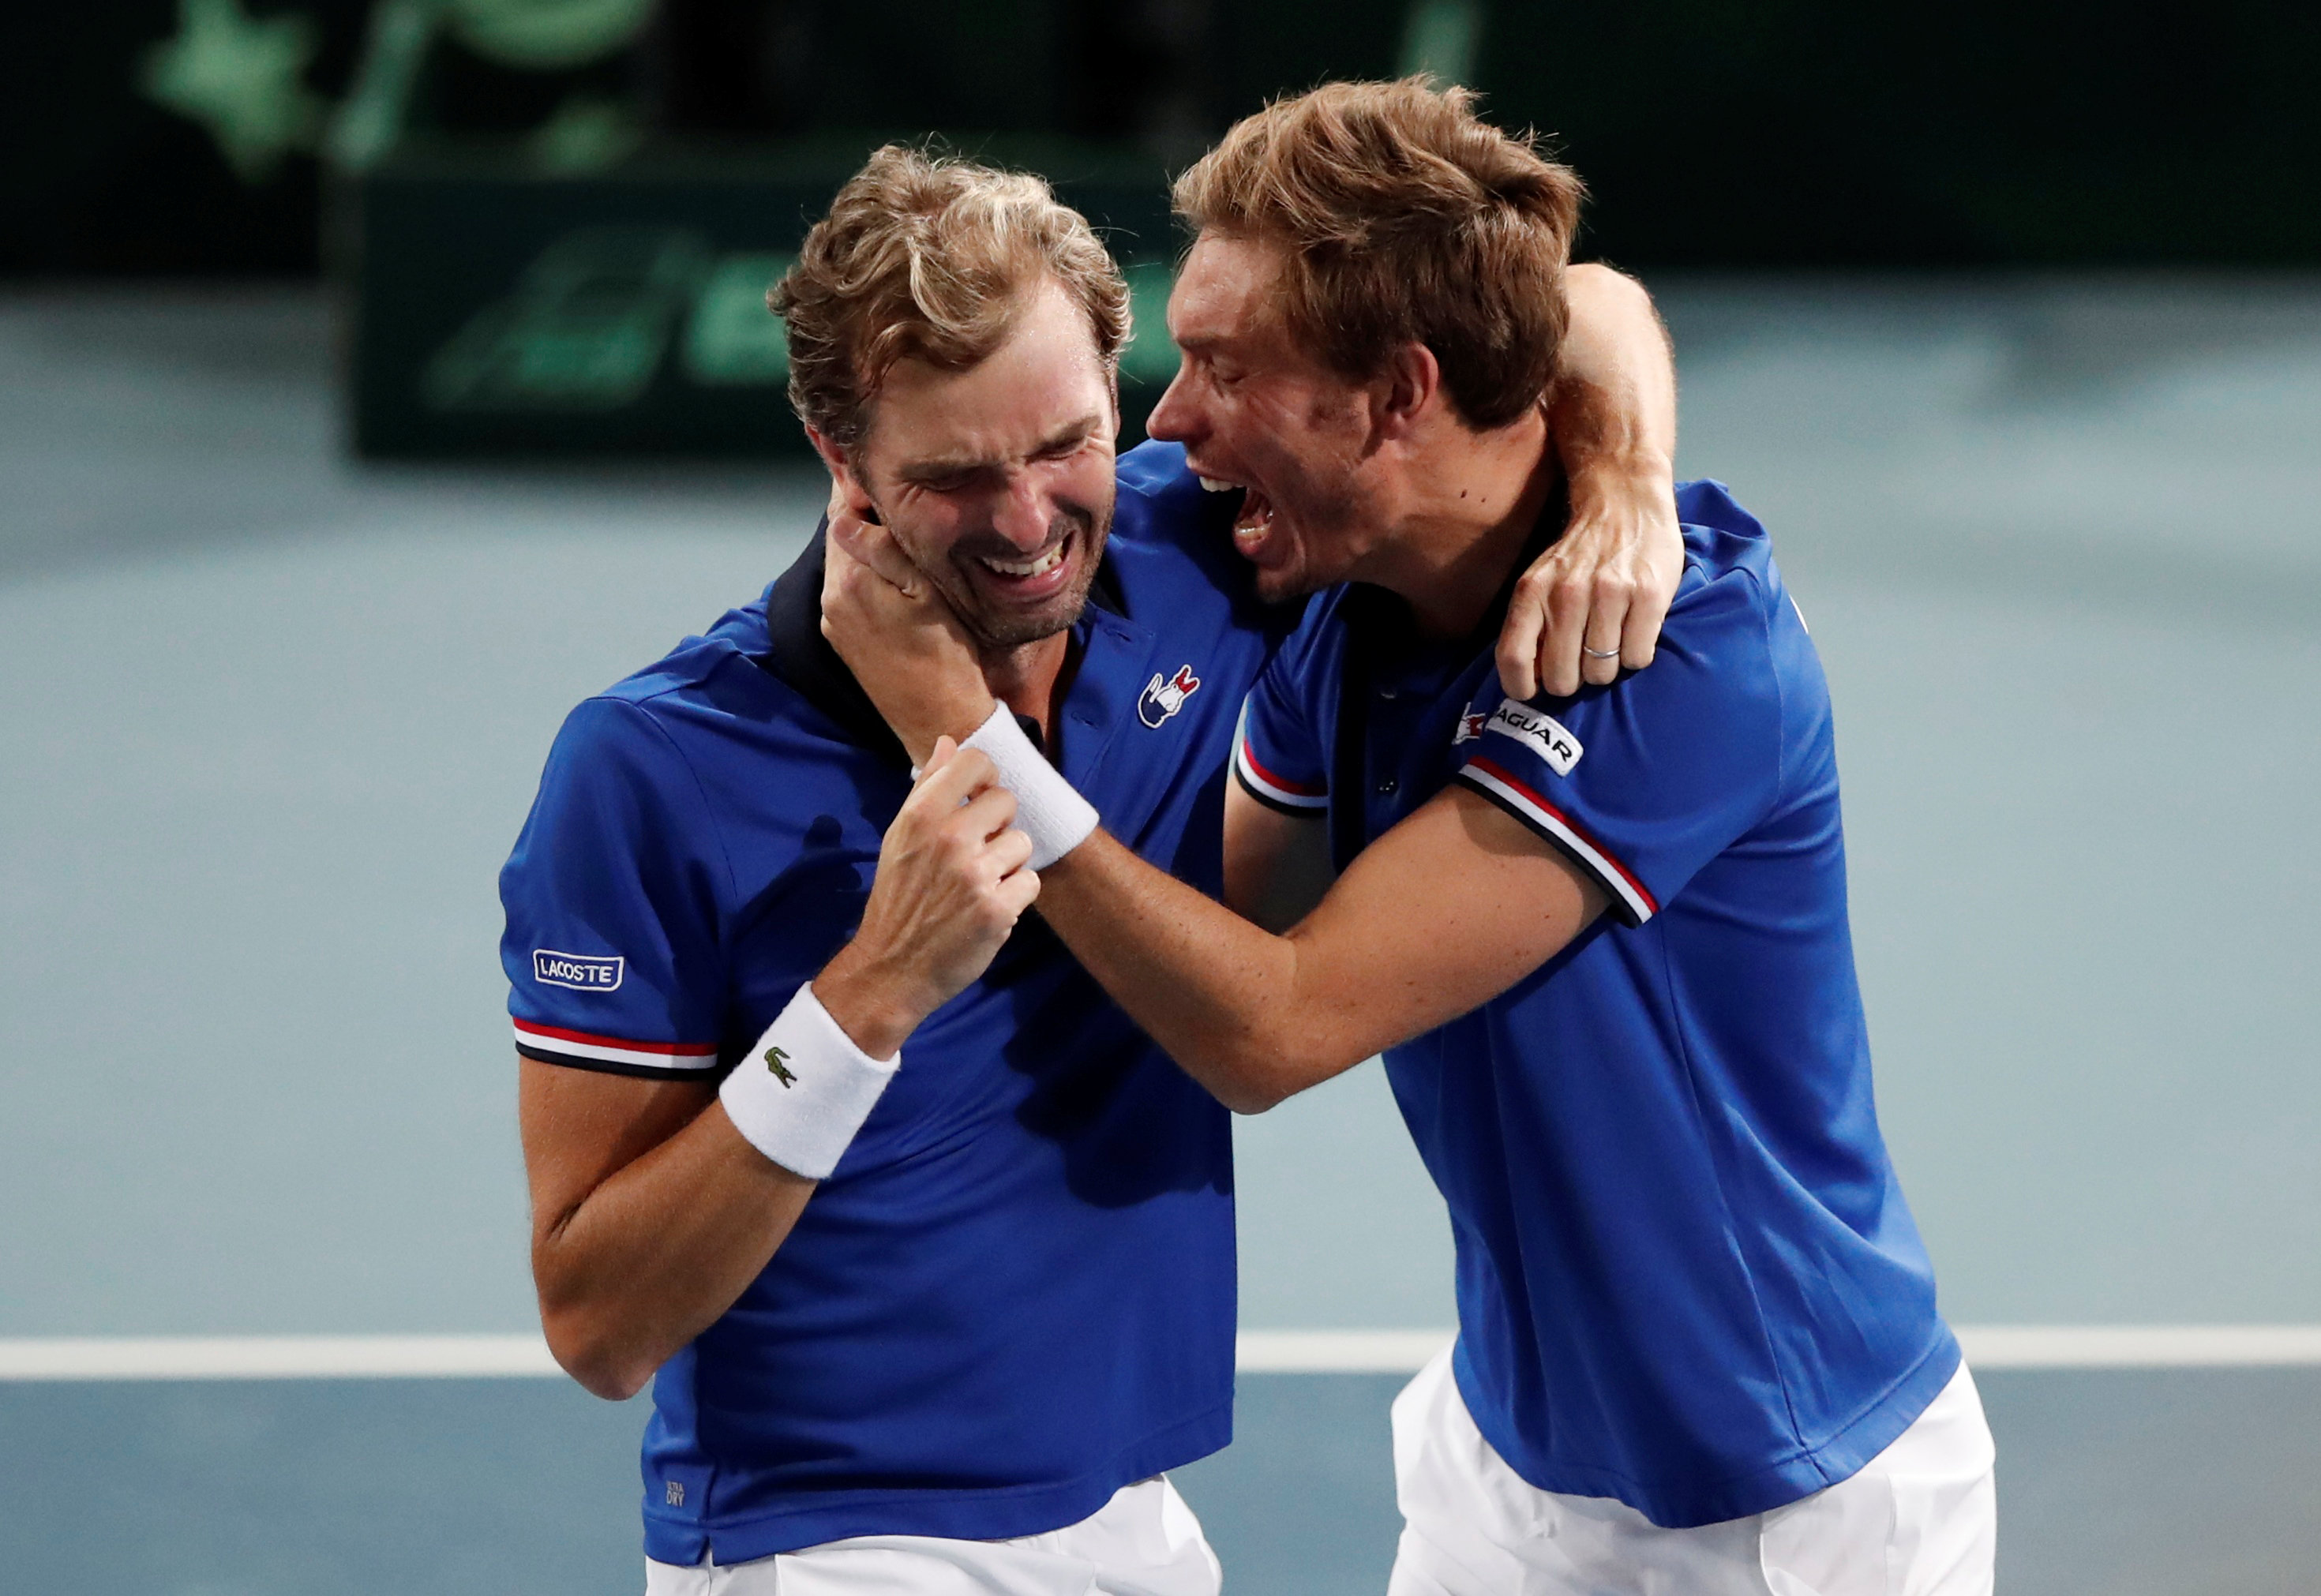 Tennis: France back in Davis Cup final with win over Spain